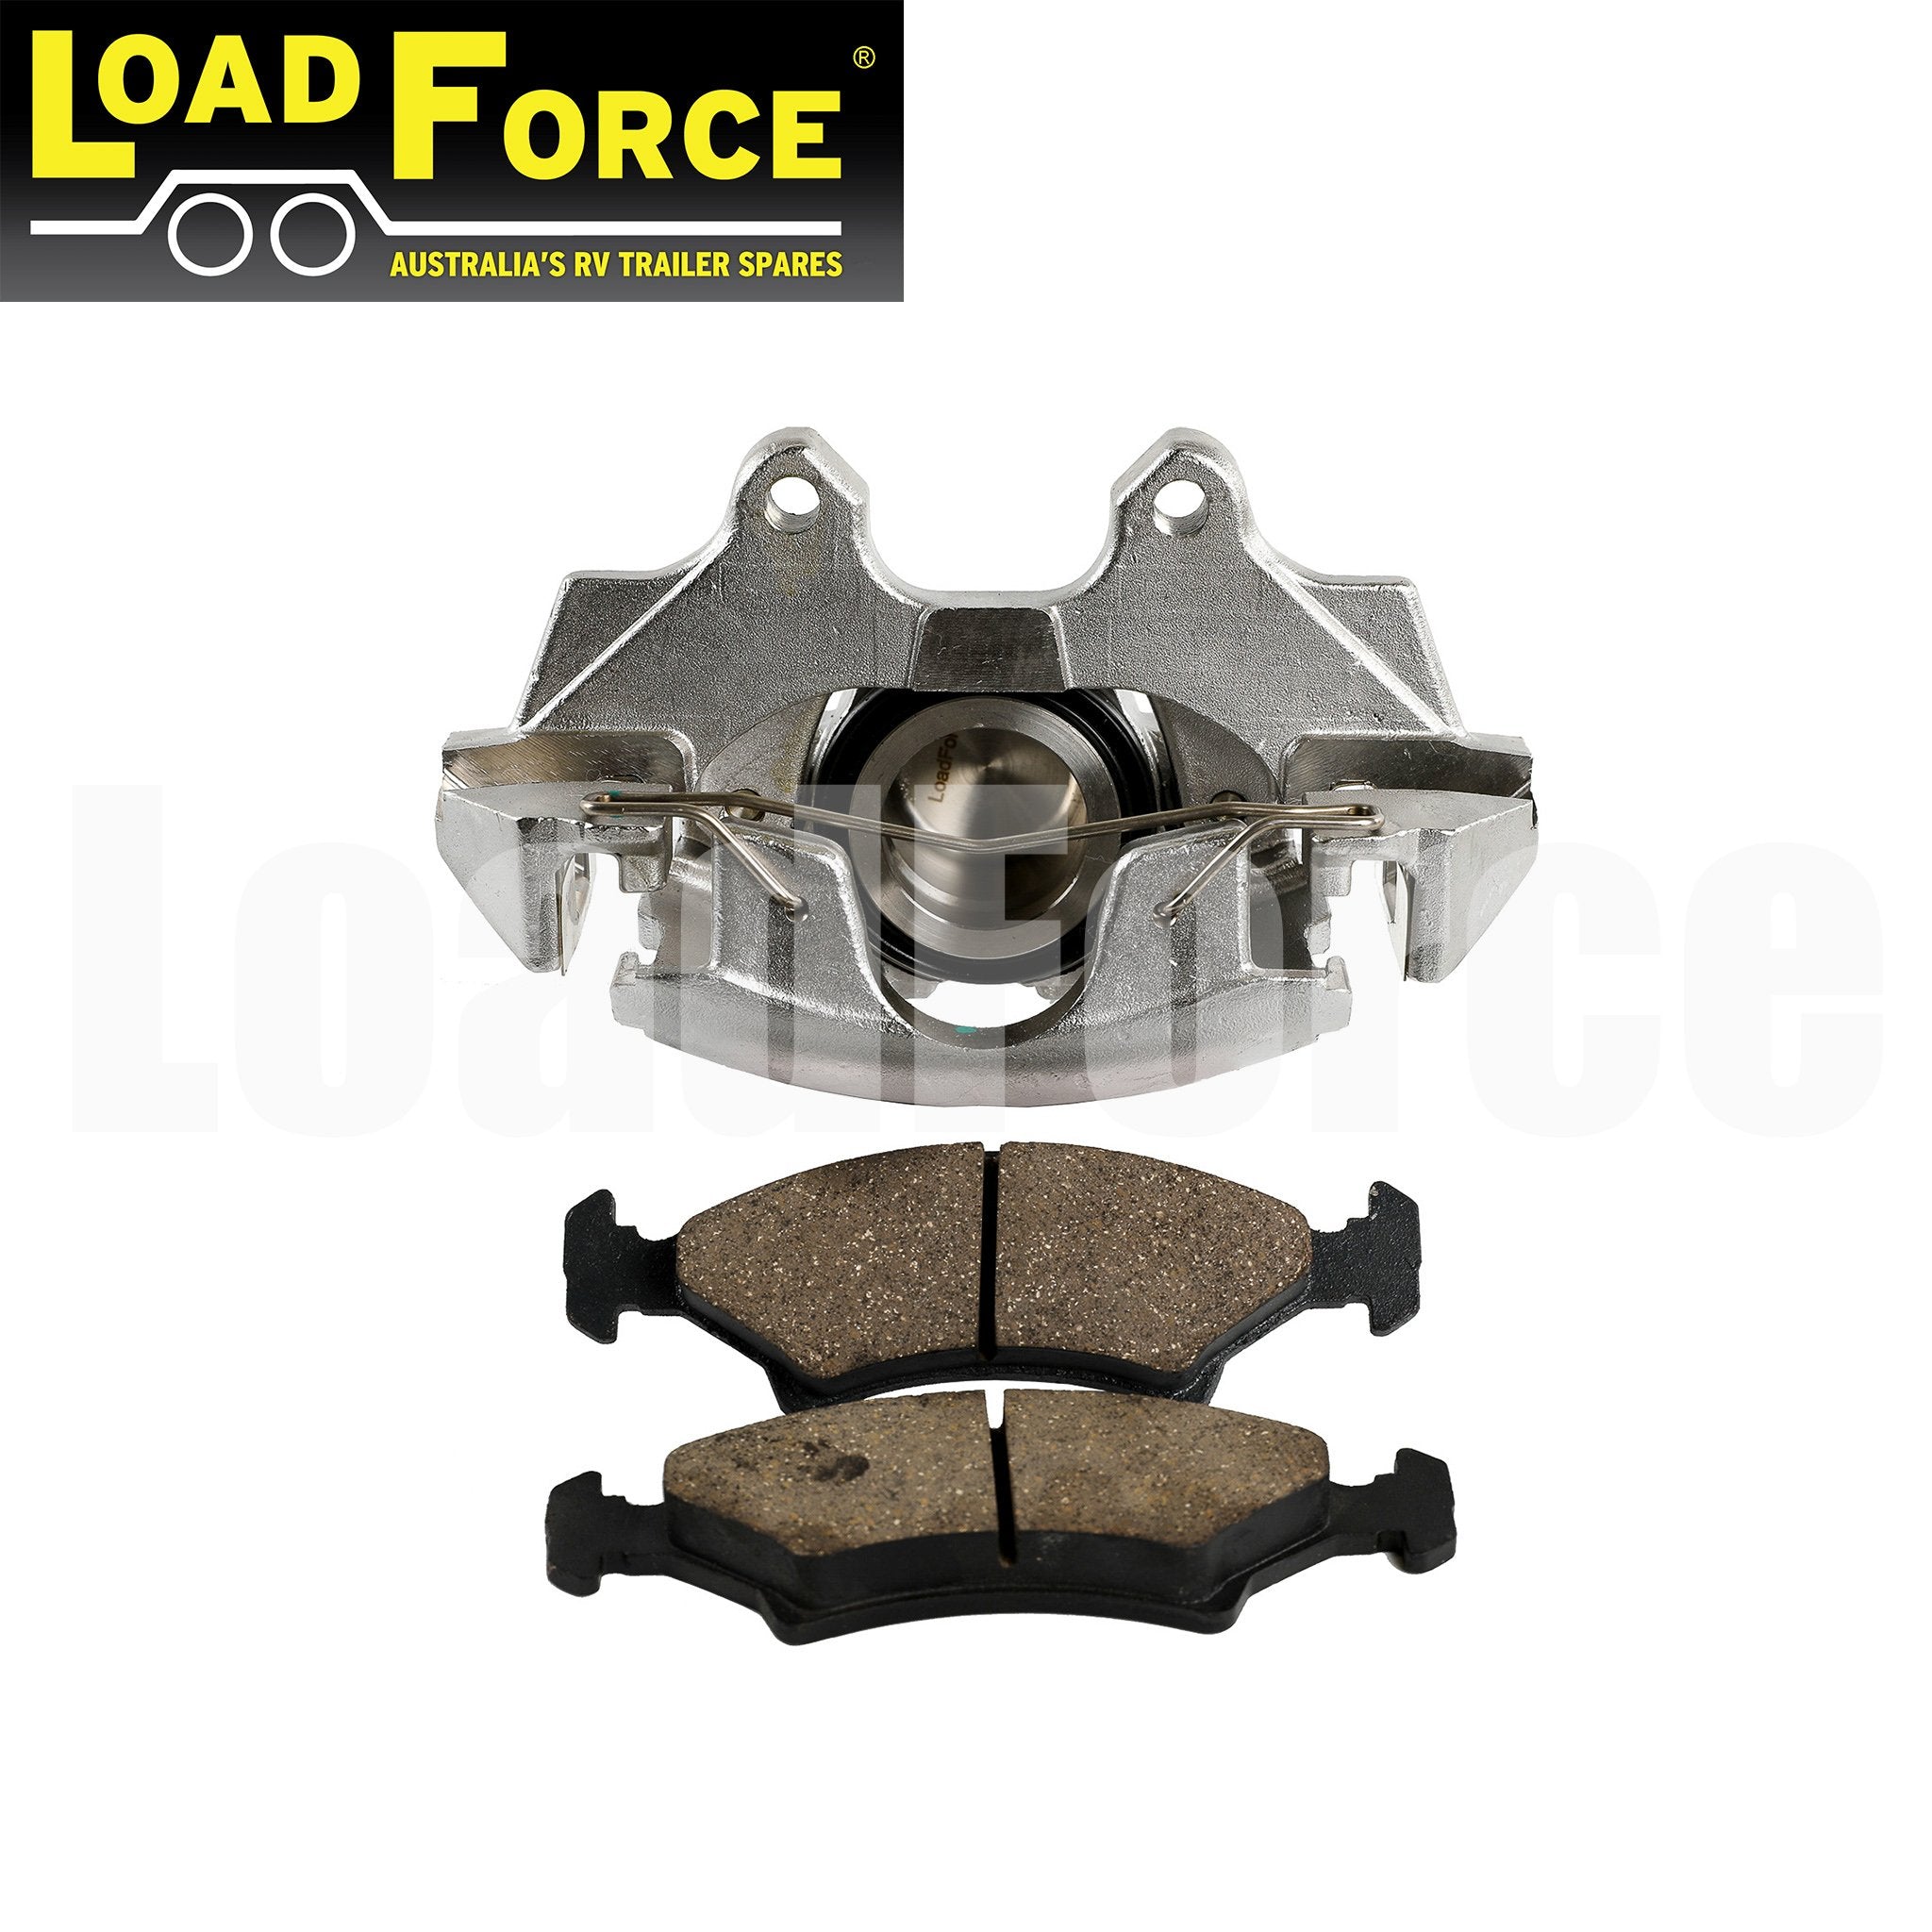 LoadForce stainless hydraulic trailer brake caliper with disc pads